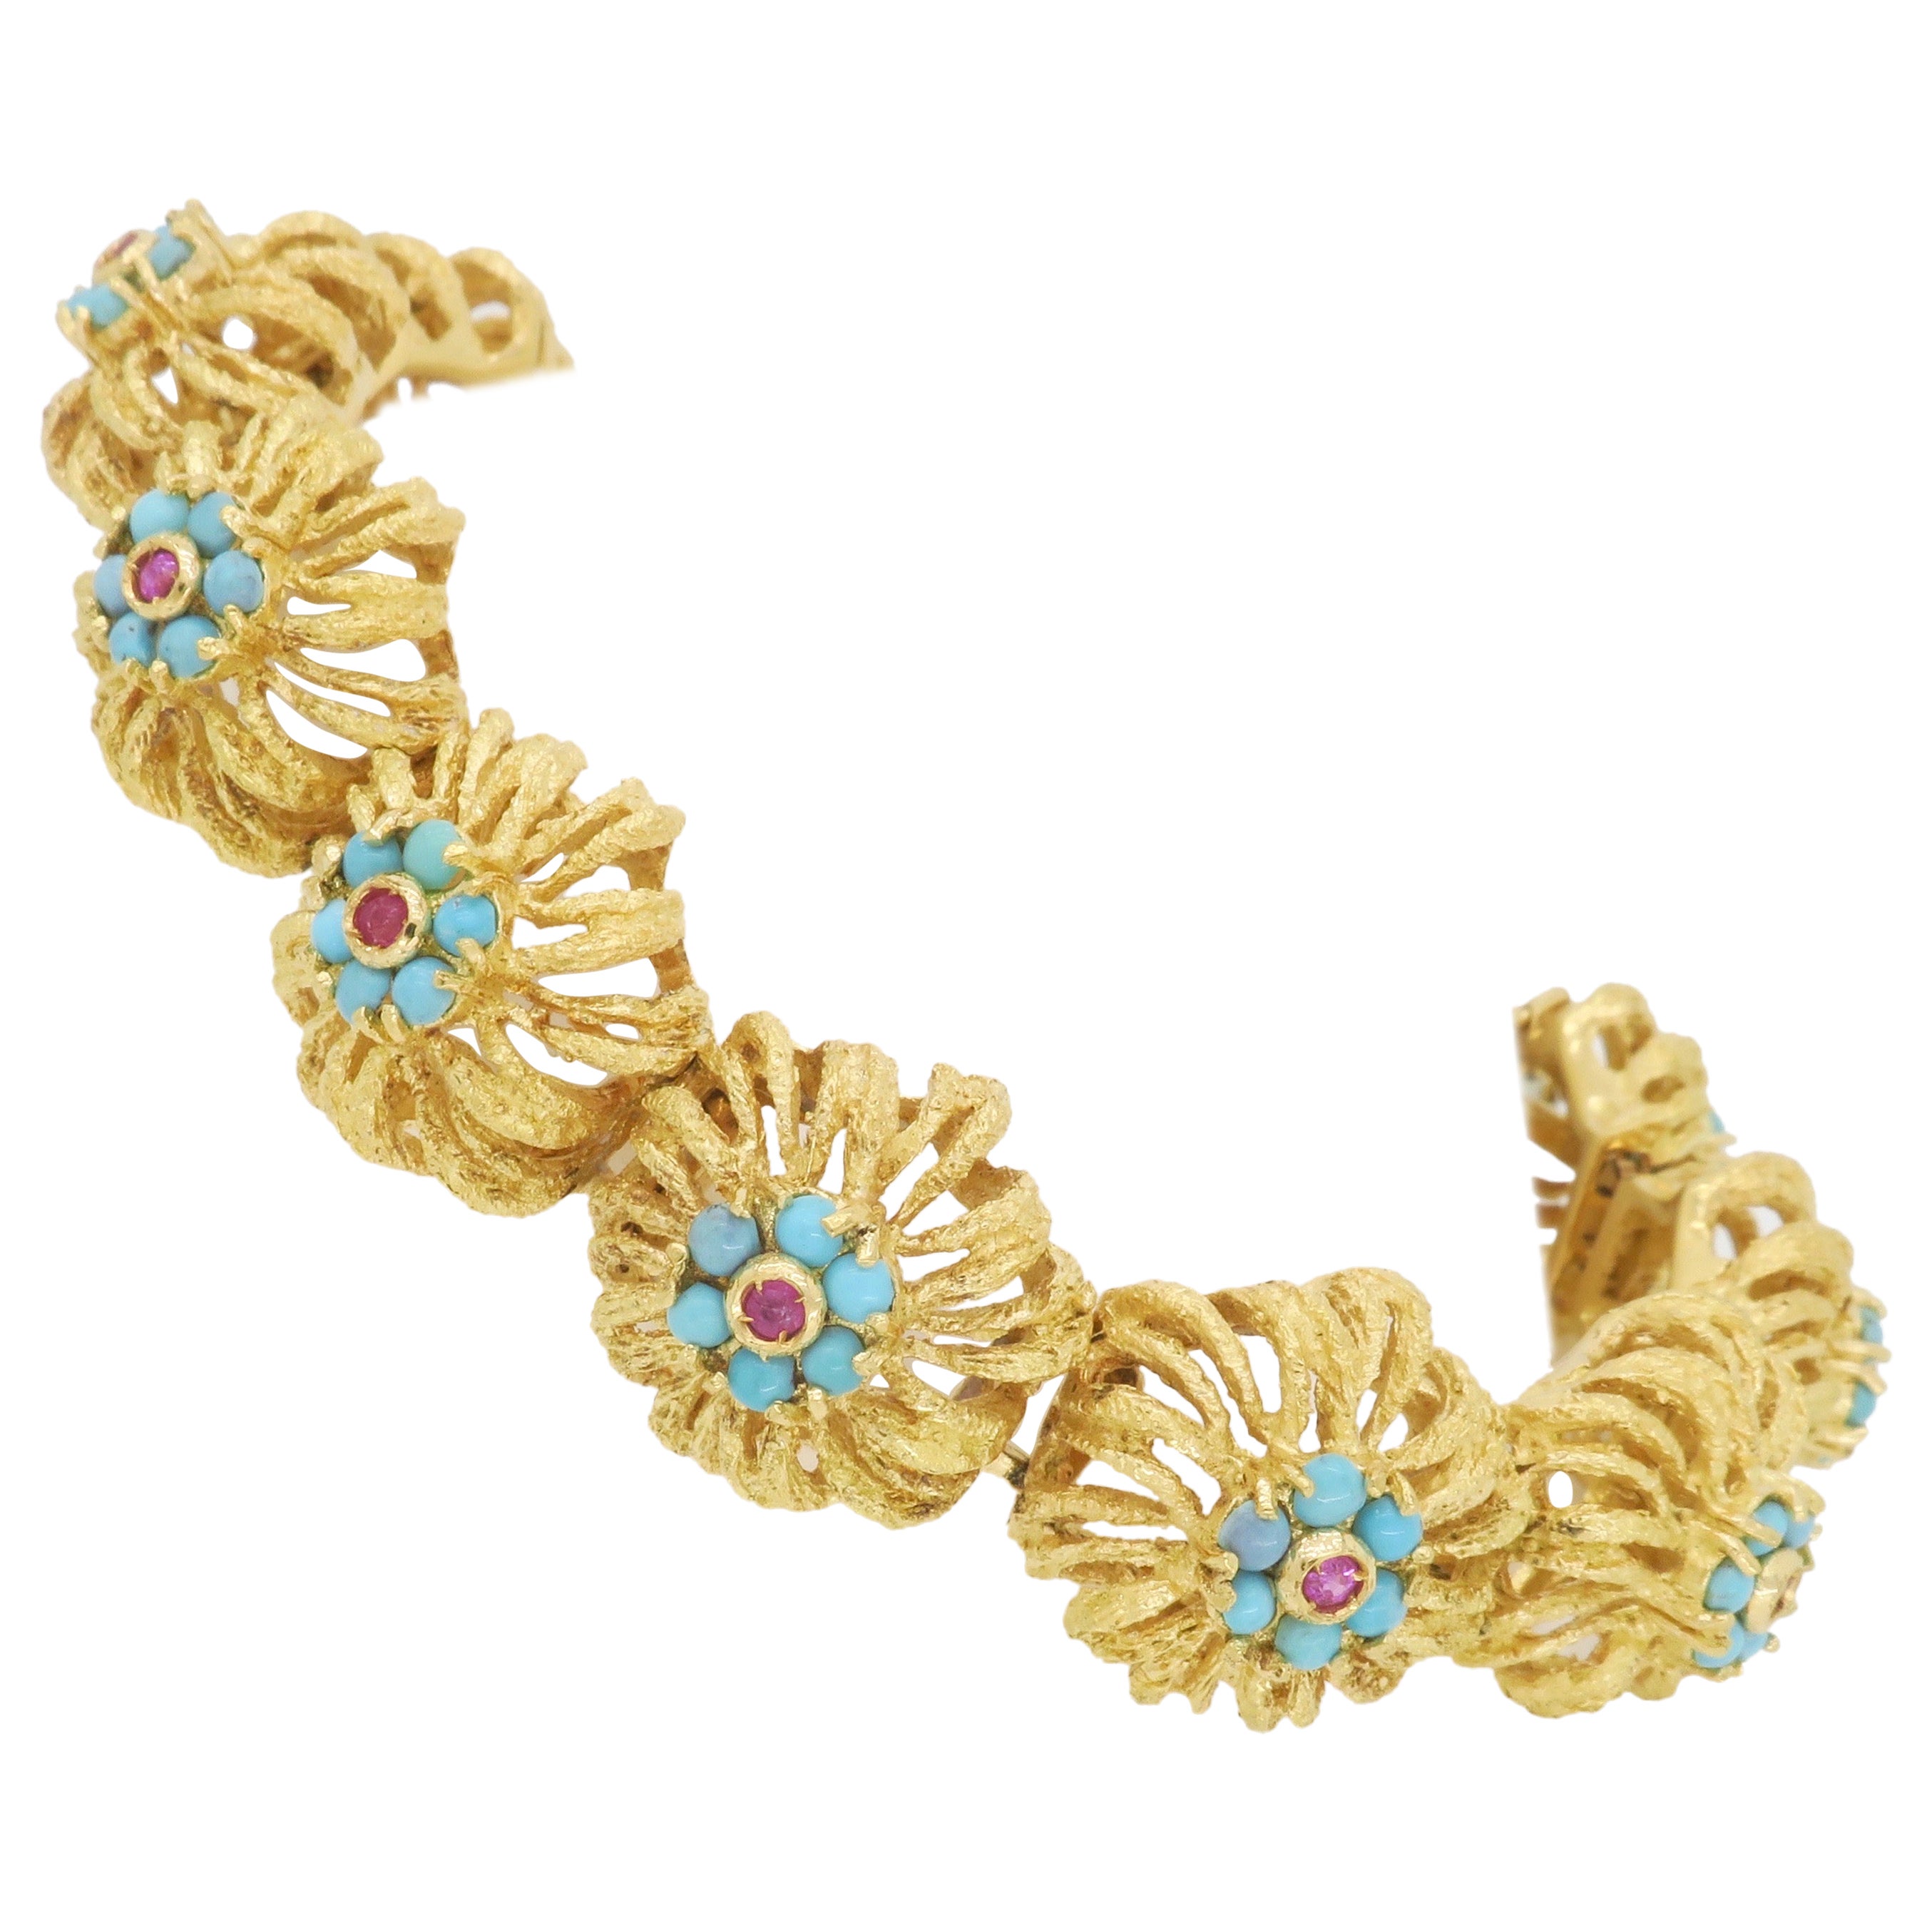 Turquoise & Ruby Floral Design Bracelet in 18k Yellow Gold